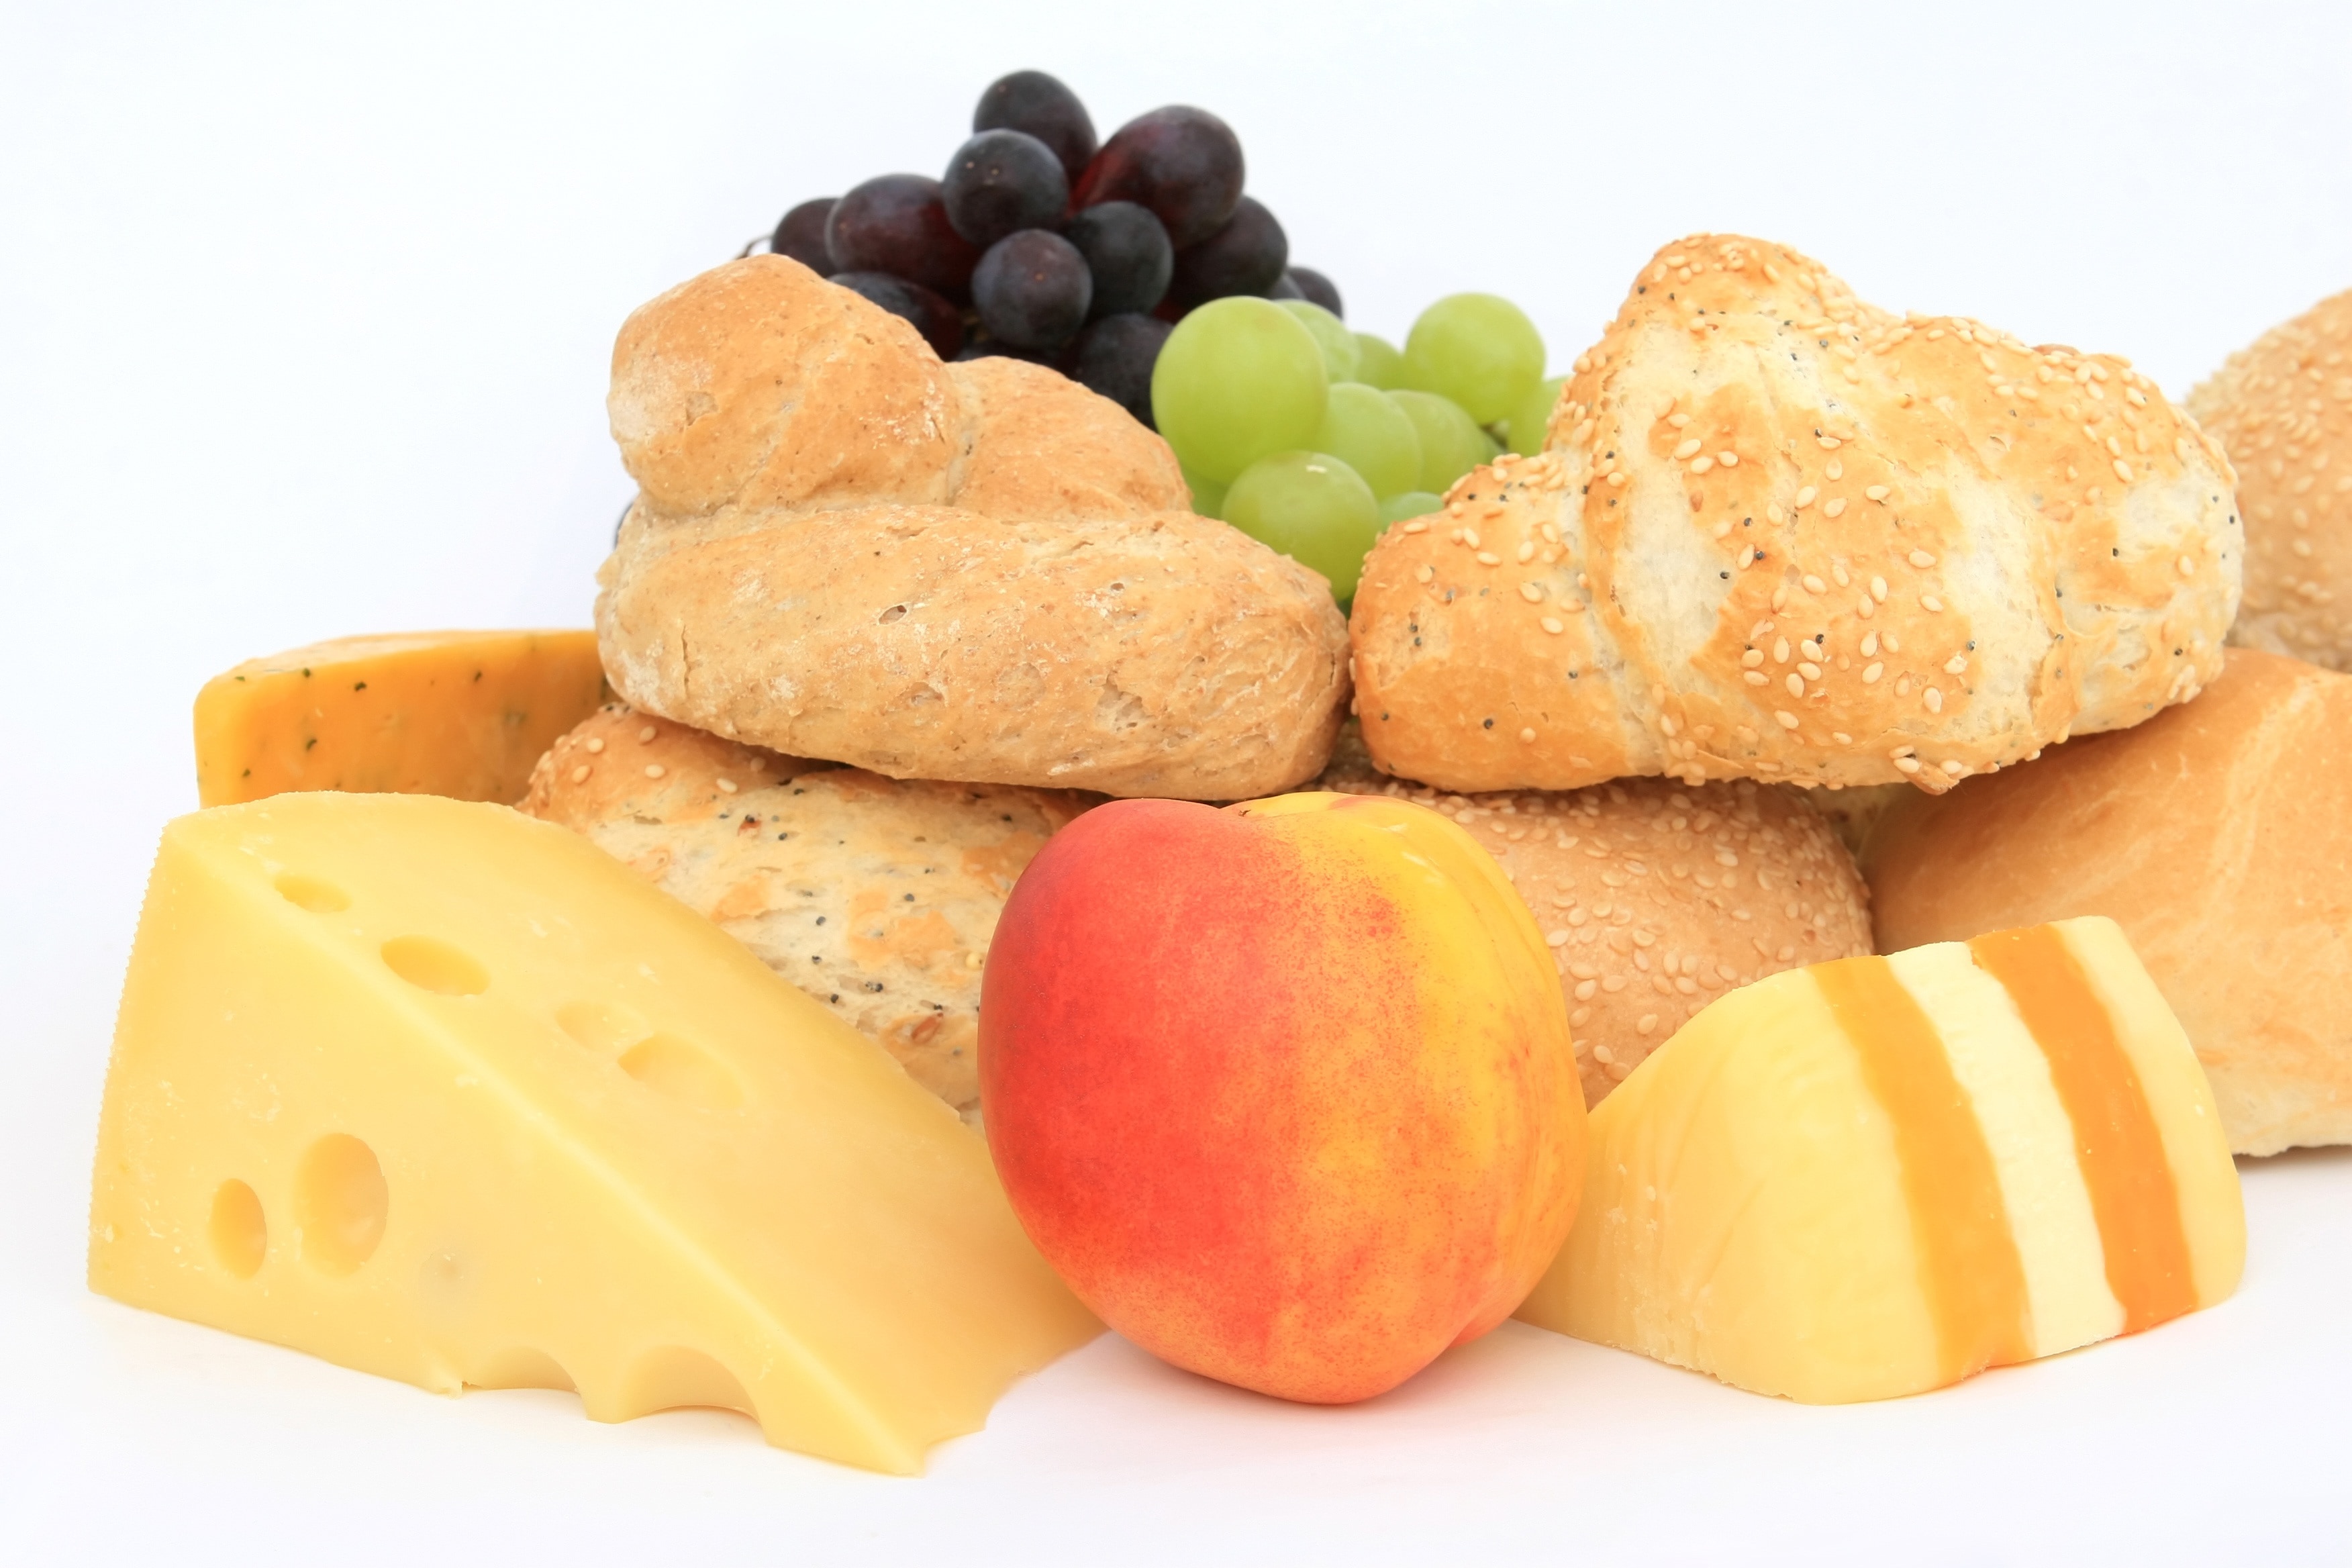 purple and green grapes, bread coated in sesame seeds, apple fruit and sliced cheese